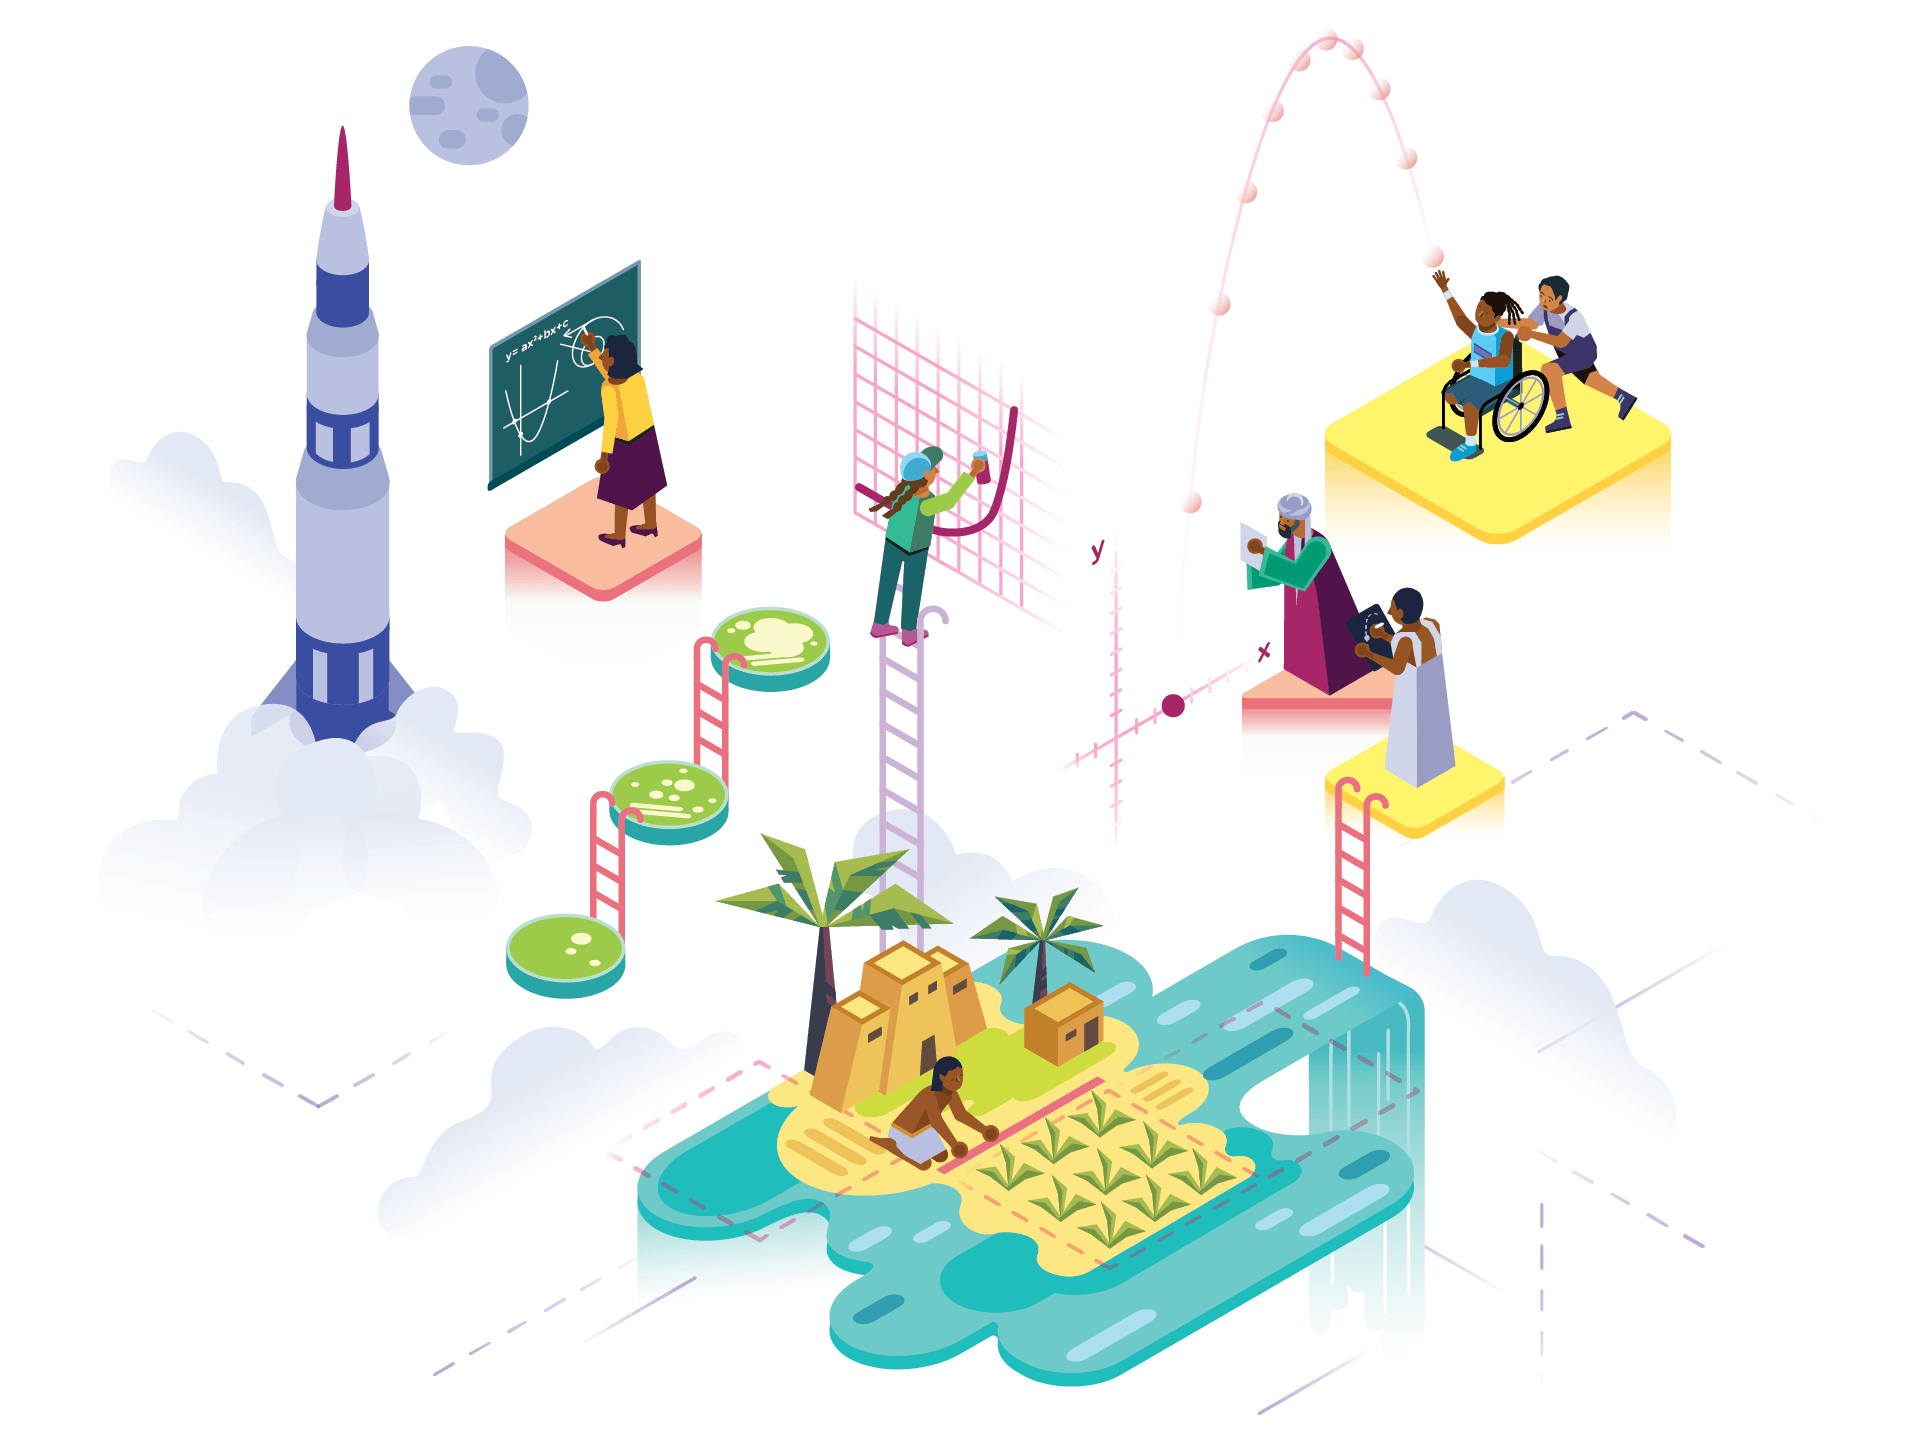 Isometric illustration depicting various educational and scientific activities, including a rocket launch, classroom teaching using ԰ʿcurriculum, laboratory experiments, agricultural research, and bridge construction.